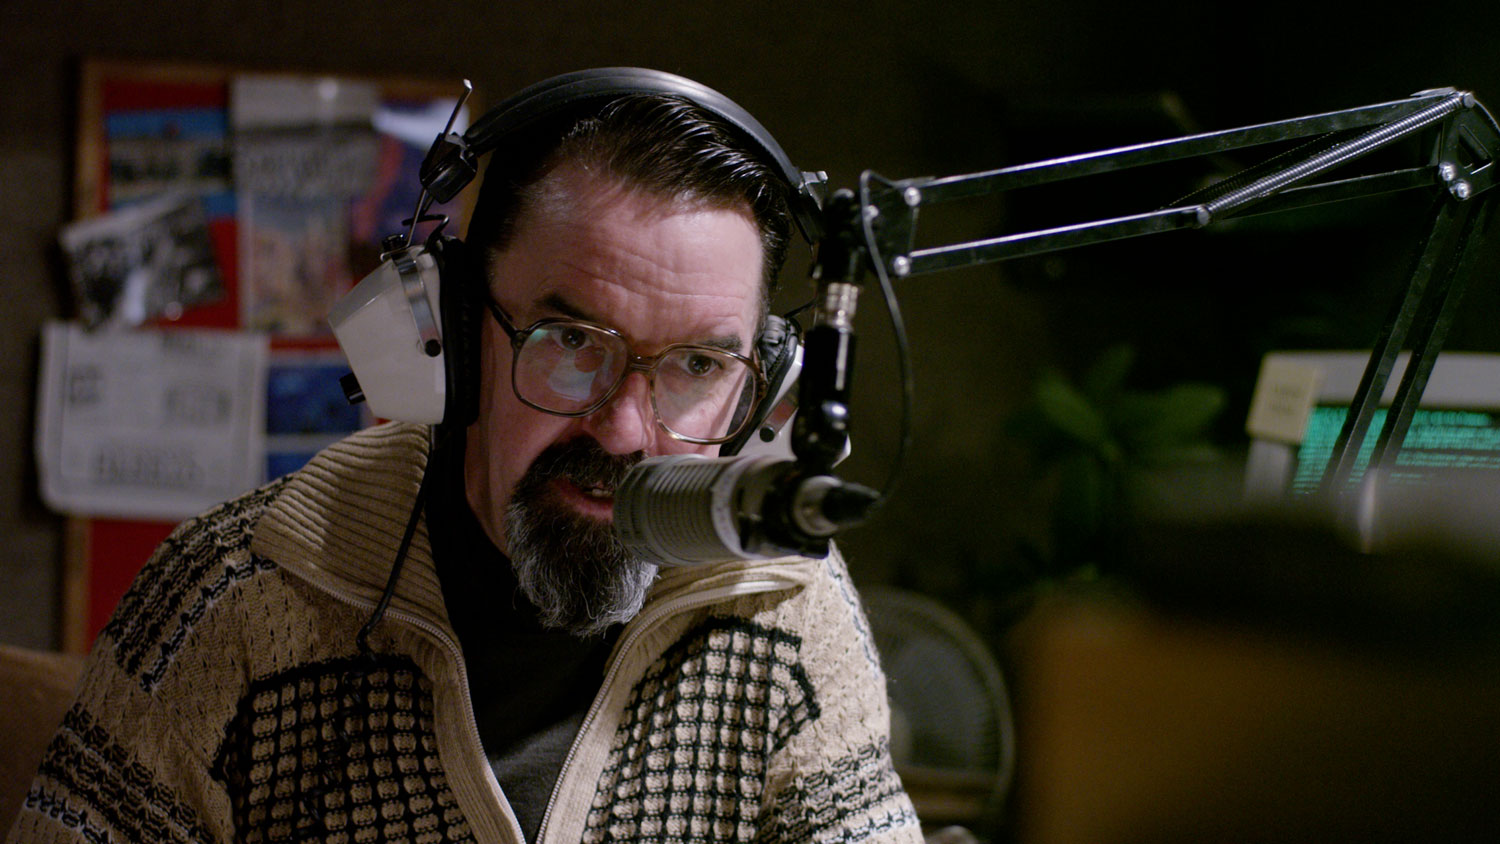 Gerard Byrne speaks into a 70's era radio microphone while wearing white vintage style headphones. 